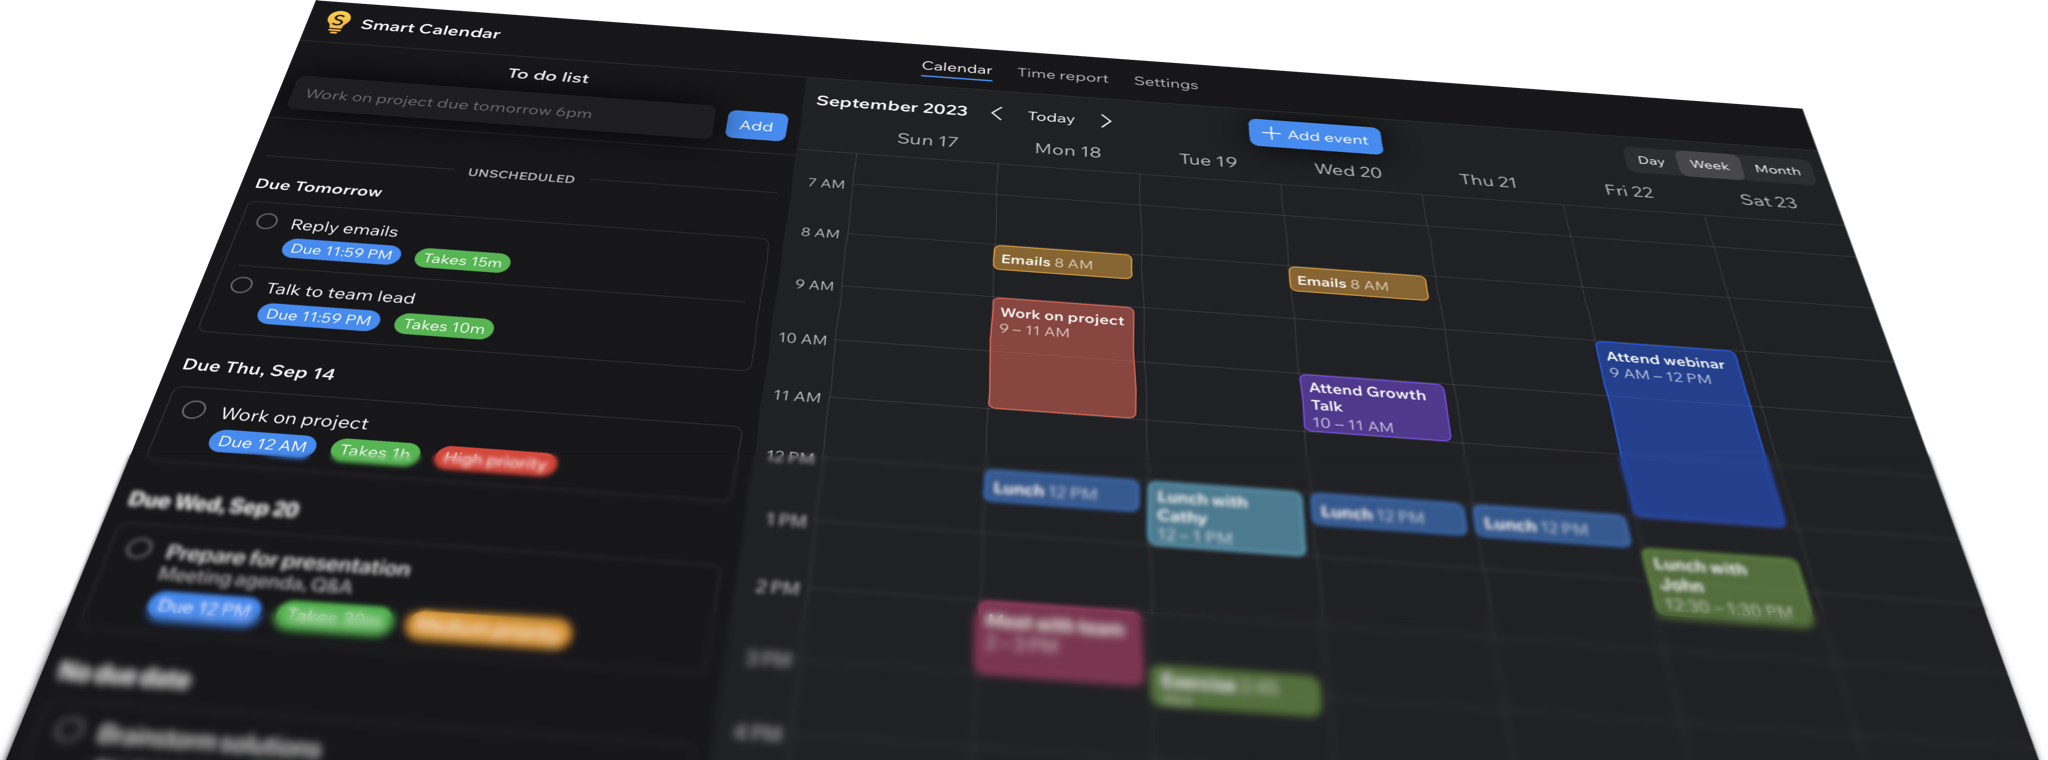 In-app interface showing calendar and to-do list.